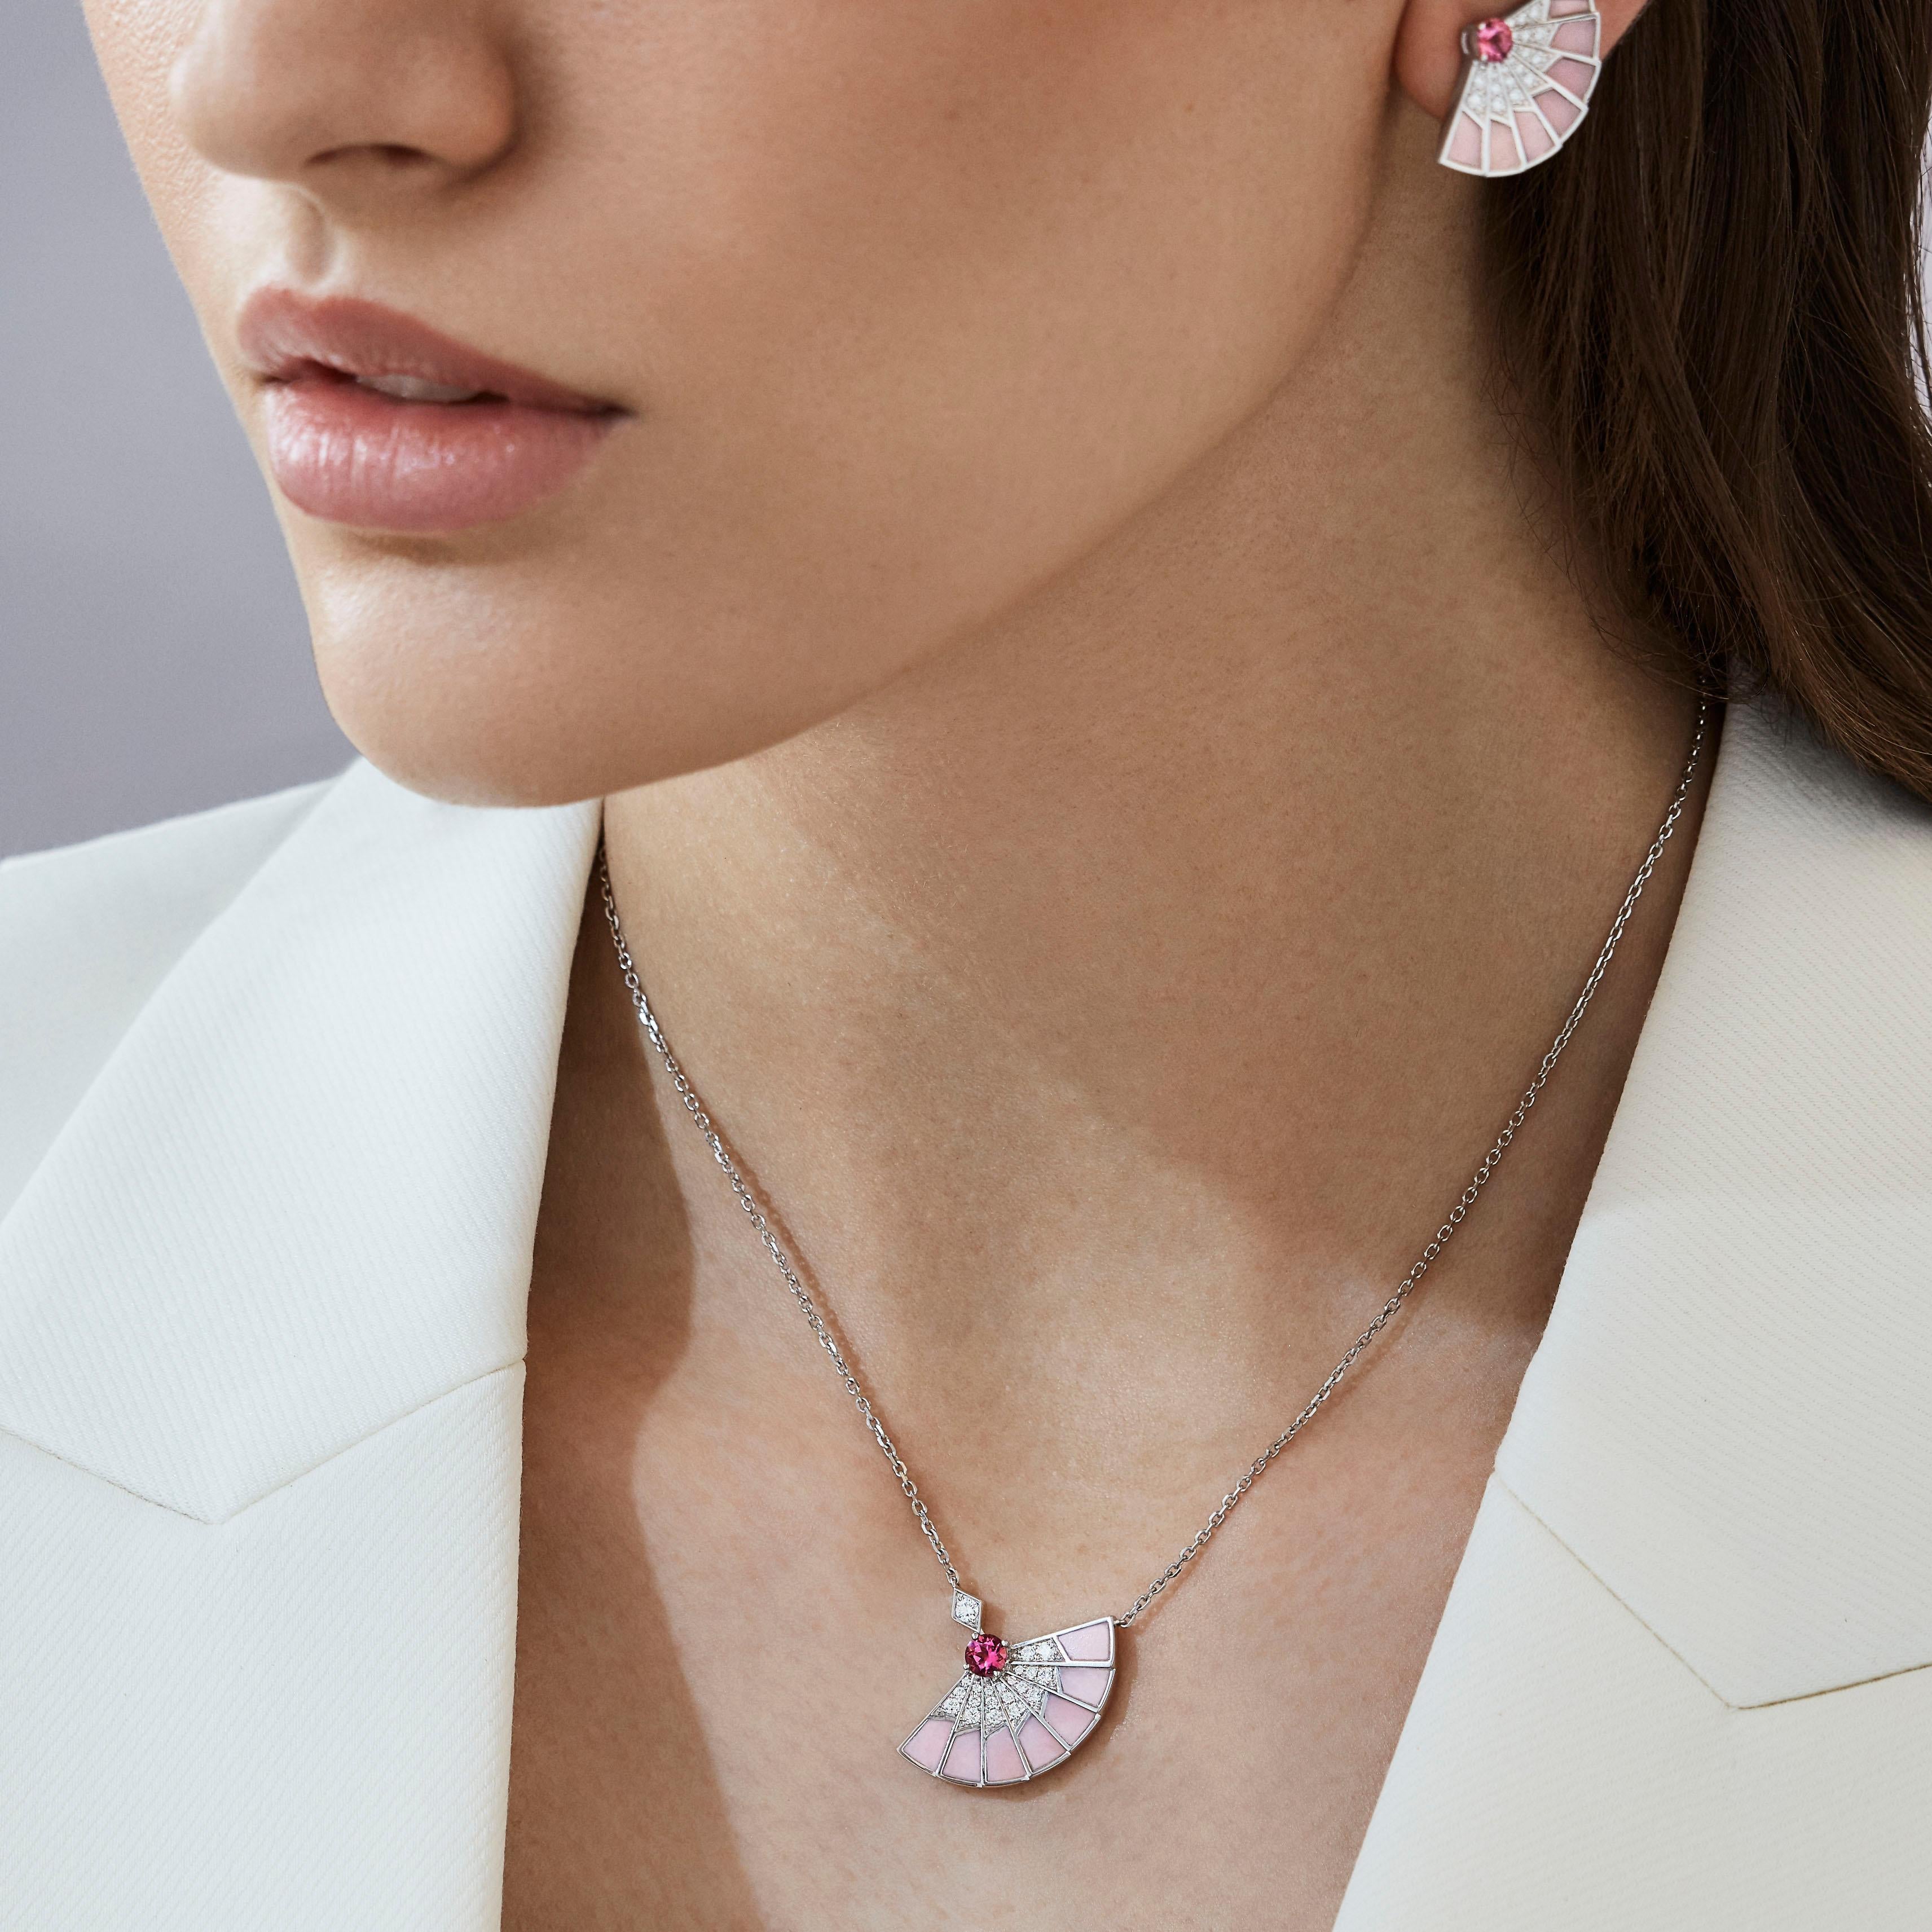 A House of Garrard 18 karat white gold 'Fanfare Symphony' earrings, set with round pink tourmalines, round white diamonds and pink opal inlay.

13 round pink tourmalines weighing: 0.77cts
74 round white diamonds weighing: 0.90cts
19 pieces of pink